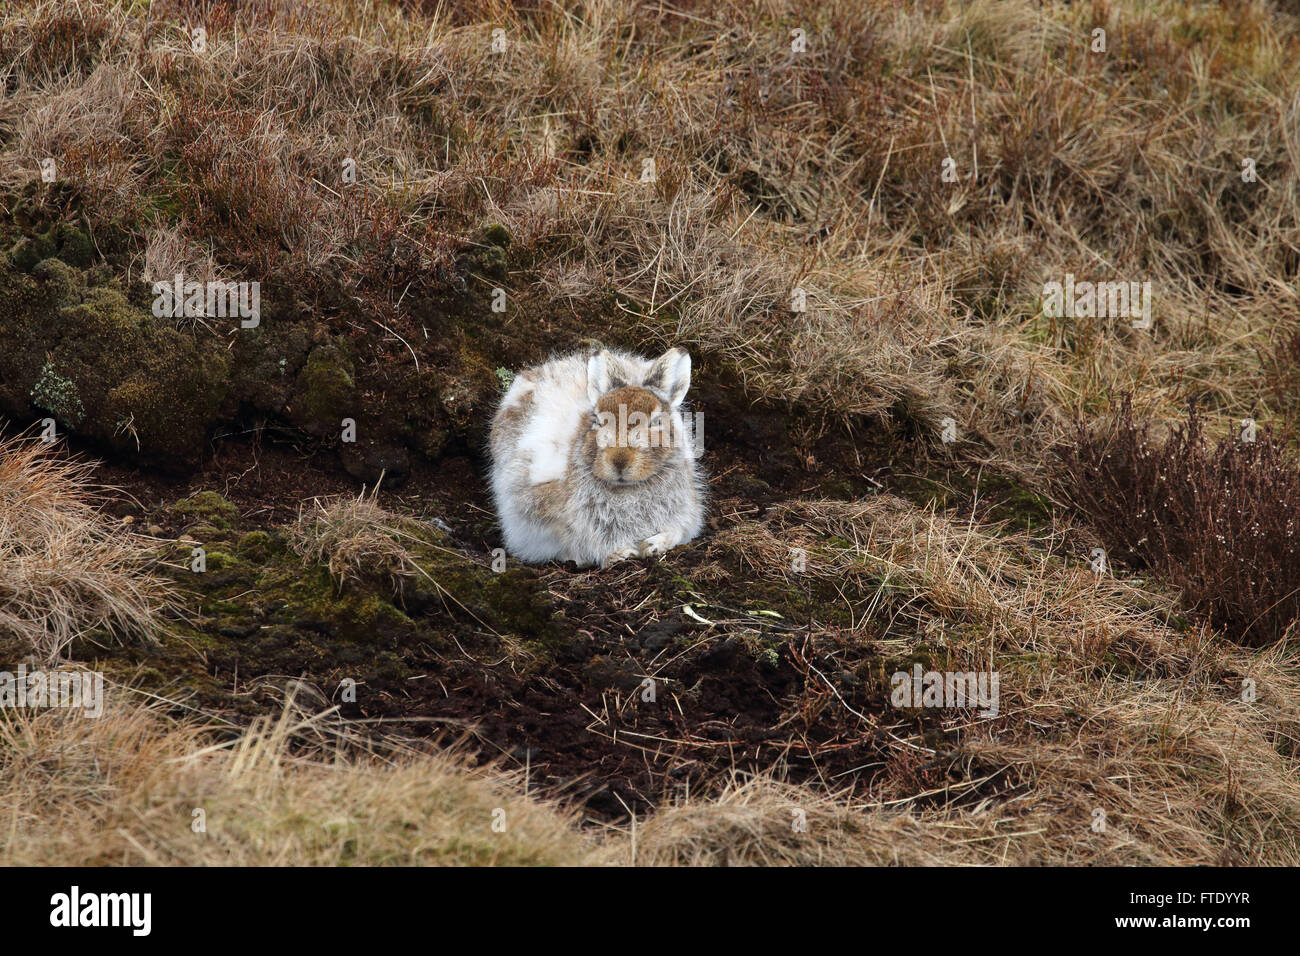 Mountain Hare lepus timidus hiding under undercut peat on moorland in the process of moulting it white winter coat Stock Photo